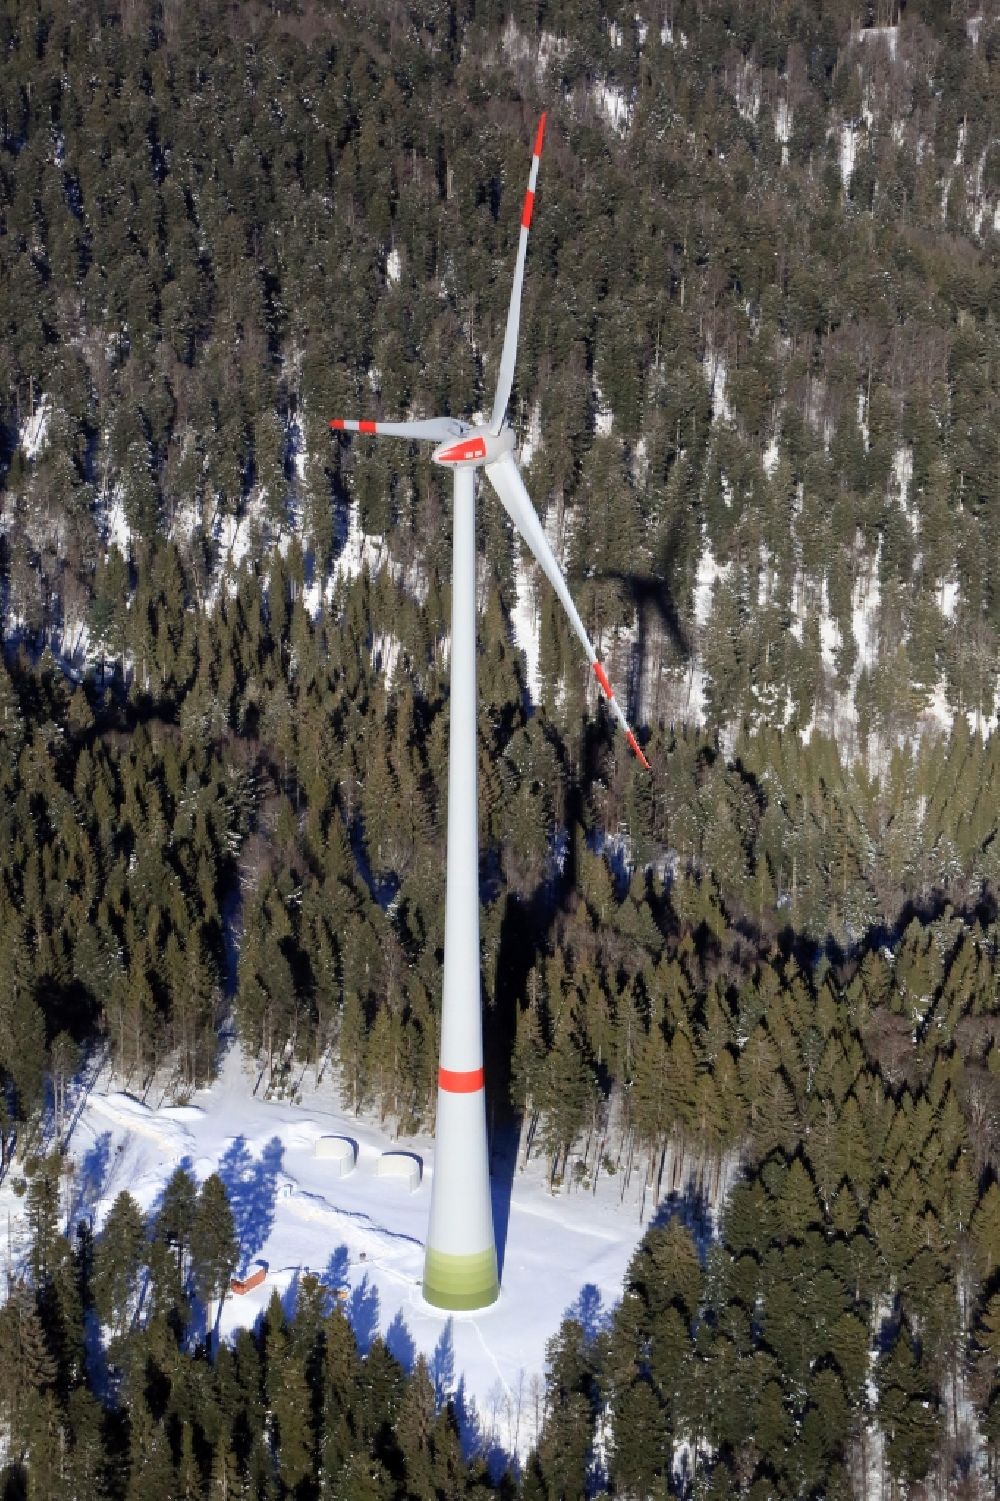 Schopfheim from the bird's eye view: On the snow covered Rohrenkopf, the local mountain of Gersbach, a district of Schopfheim in Baden-Wuerttemberg, wind turbines have started operation. It is the first wind farm in the south of the Black Forest